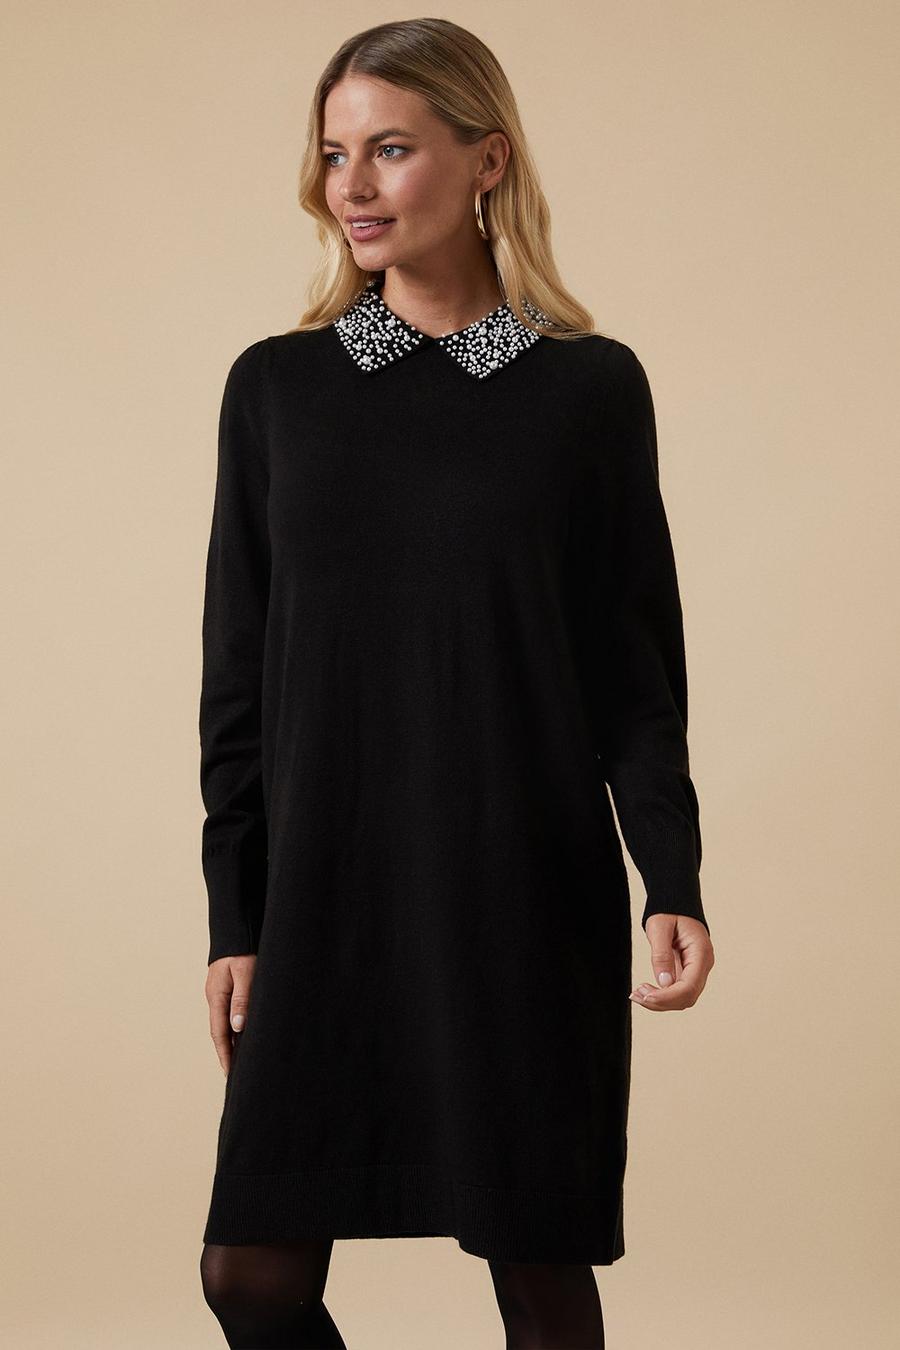 Pearl Embellished Collar Knitted Dress